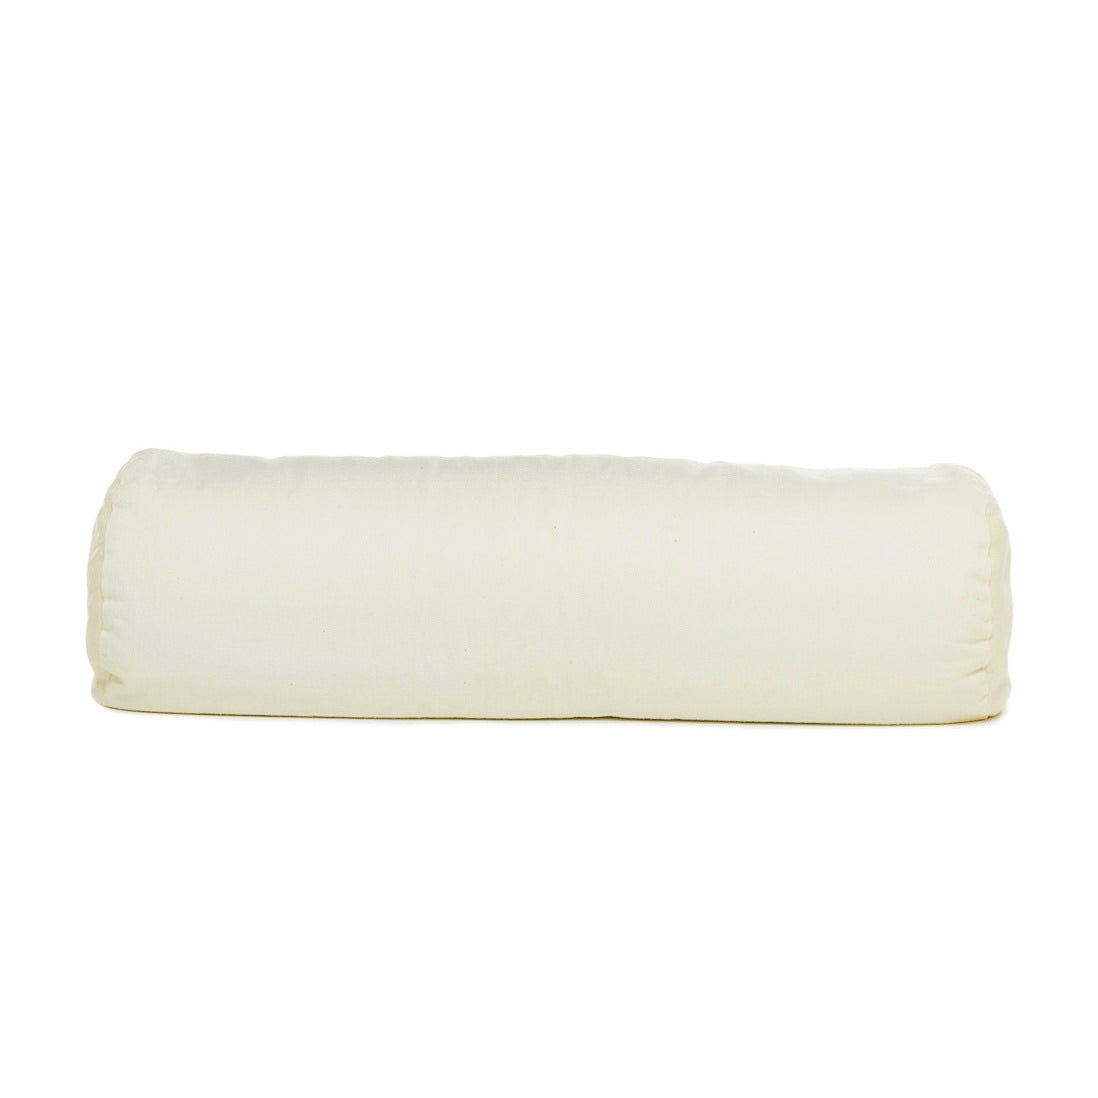 ComfyComfy cylindrical buckwheat hull pillow for supportive side sleeping